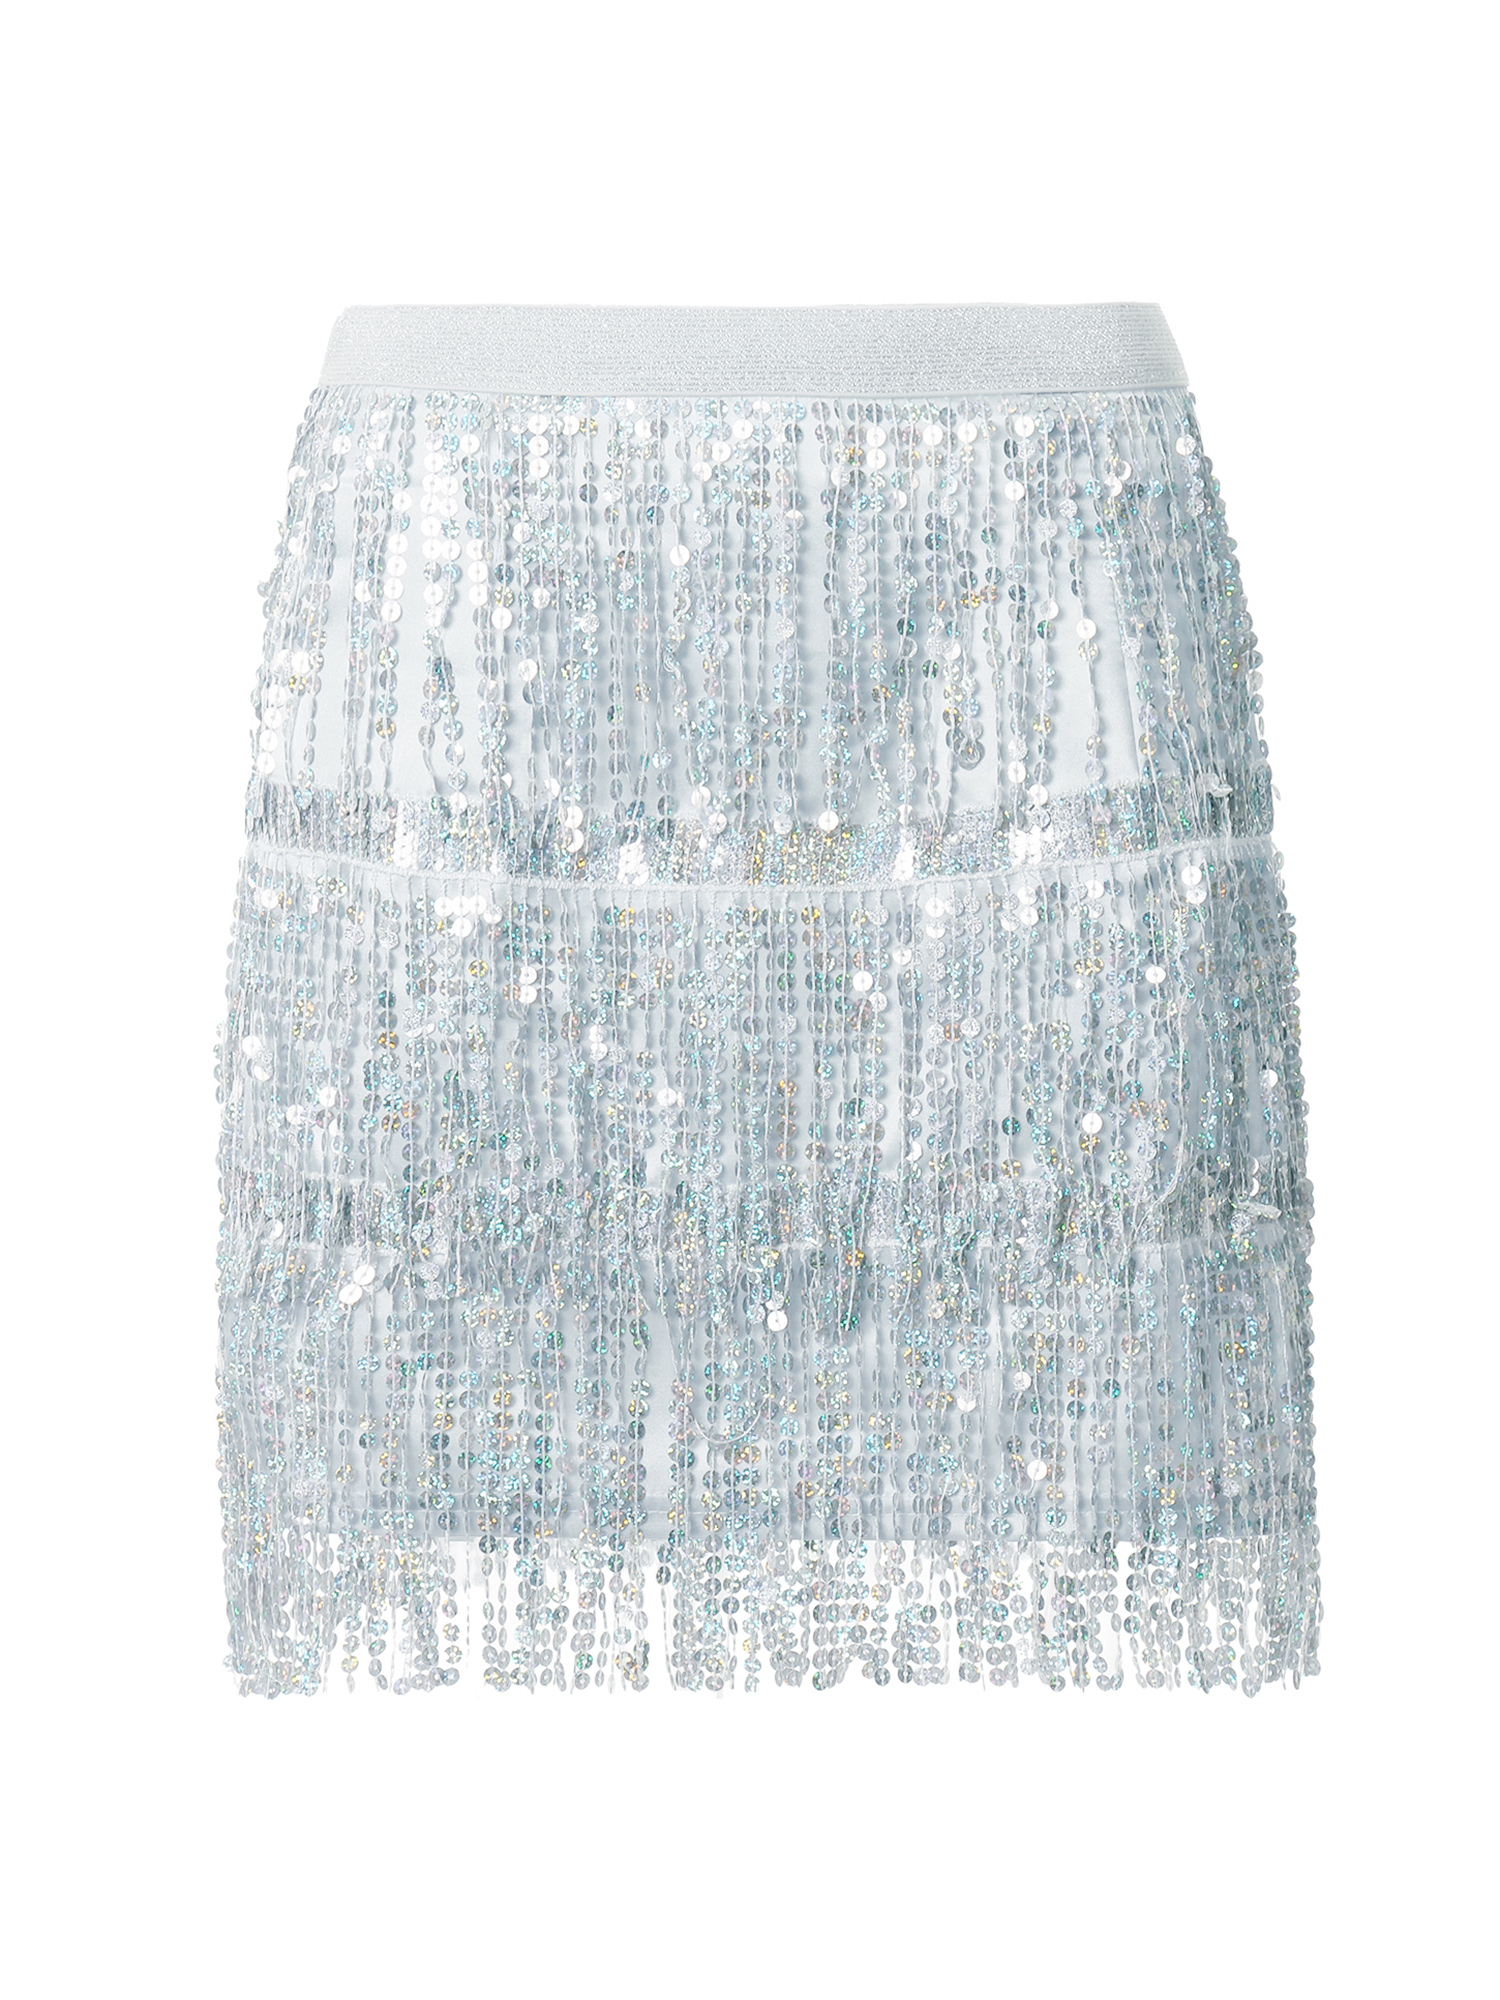 Women's Sequin Fringed Skirt Sparkle Stretchy Bodycon Mini Skirts Night ...